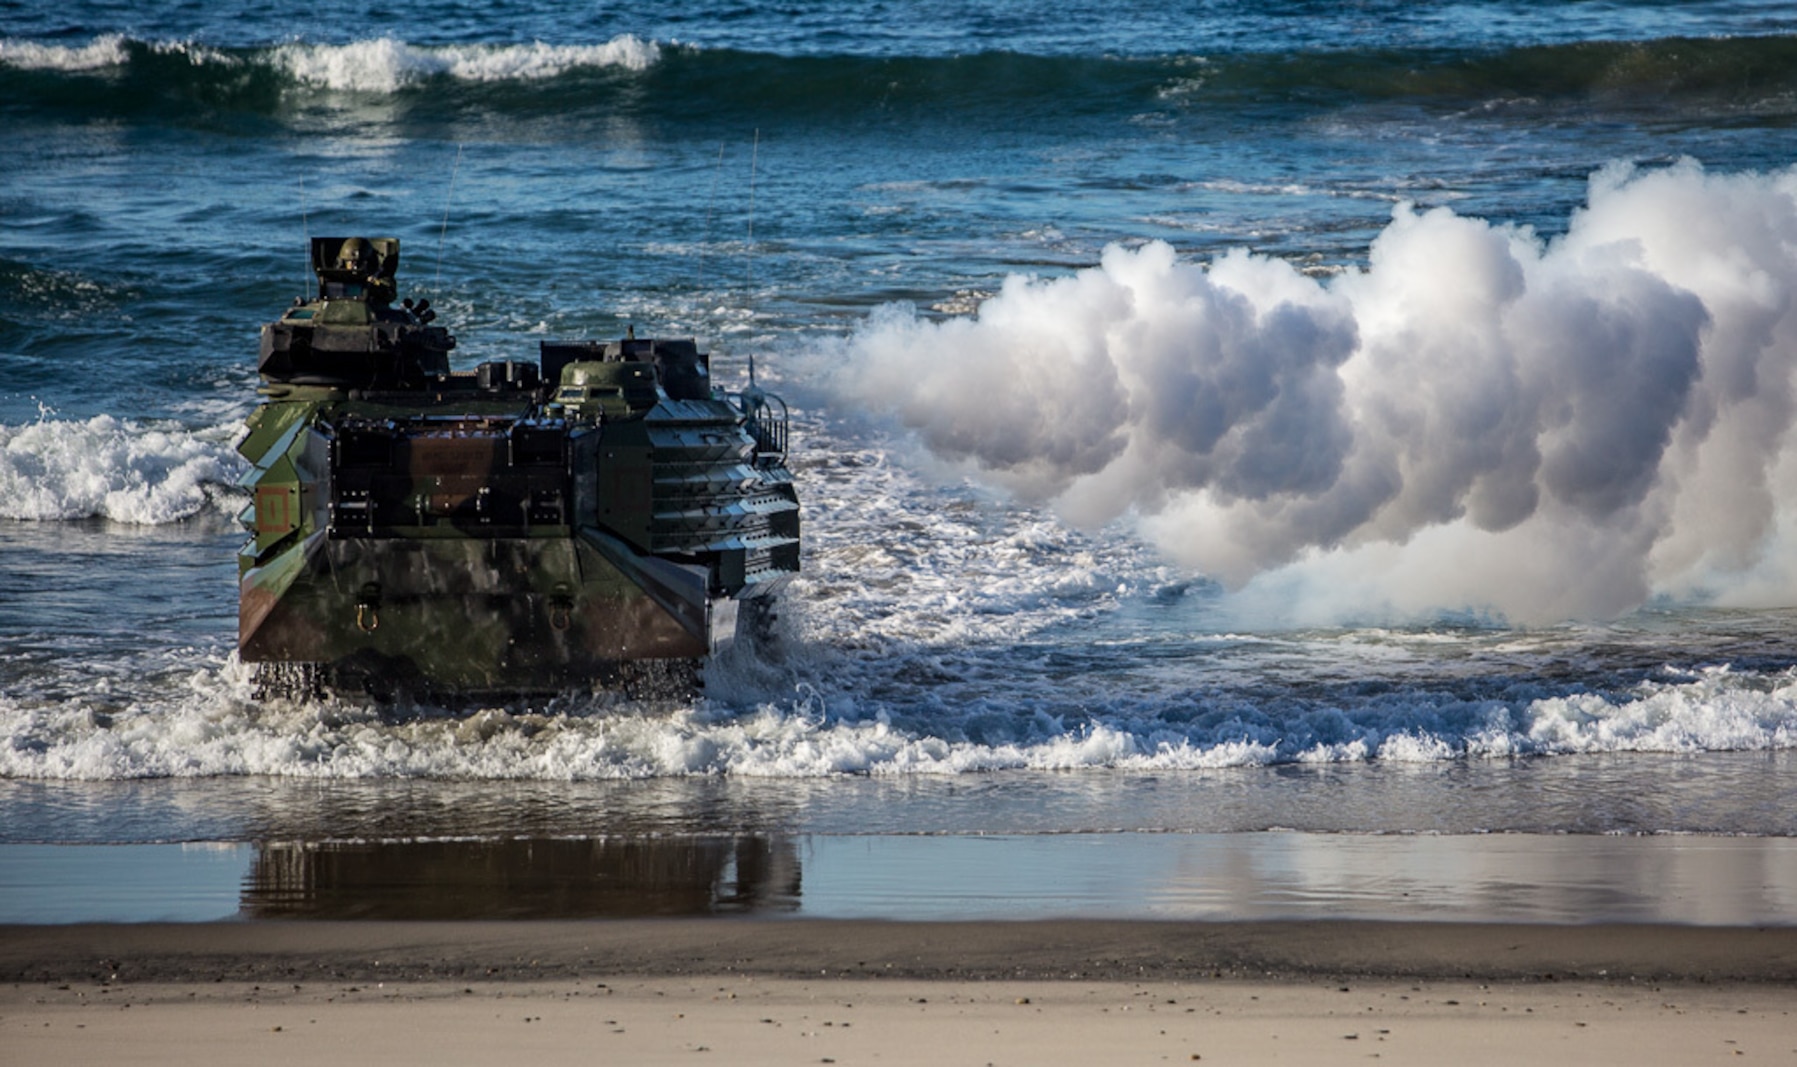 An Amphibious Assault Vehicle with 3rd Assault Amphibian Battalion, 1st Marine Division, lands on Marine Corps Base Camp Pendleton as part of exercise Iron Fist 2018 on Feb. 5.